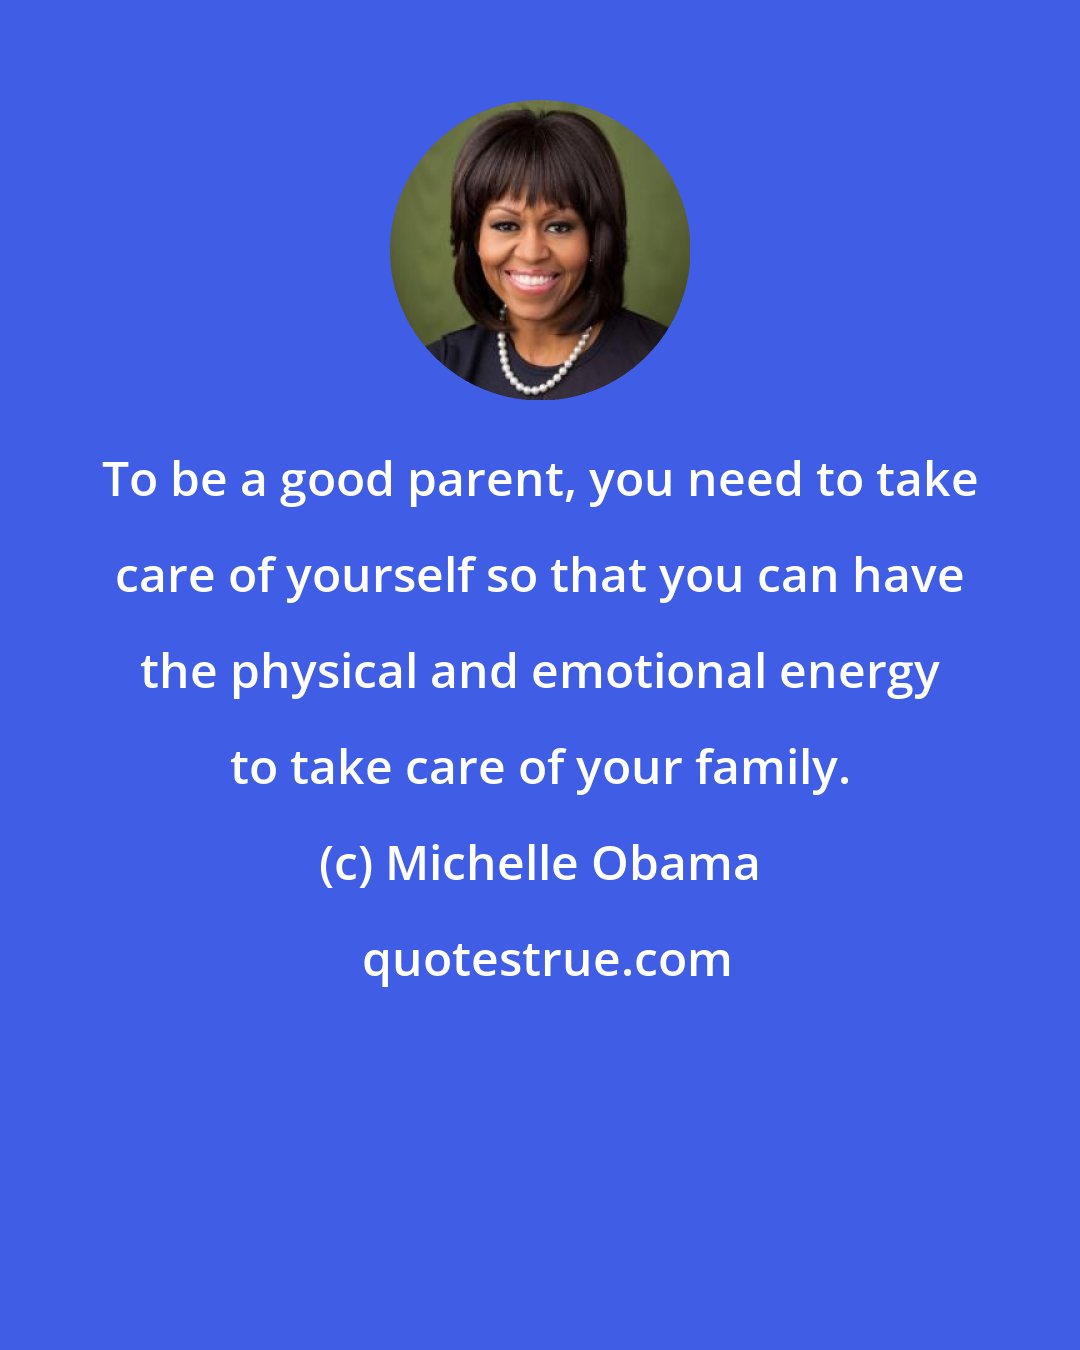 Michelle Obama: To be a good parent, you need to take care of yourself so that you can have the physical and emotional energy to take care of your family.